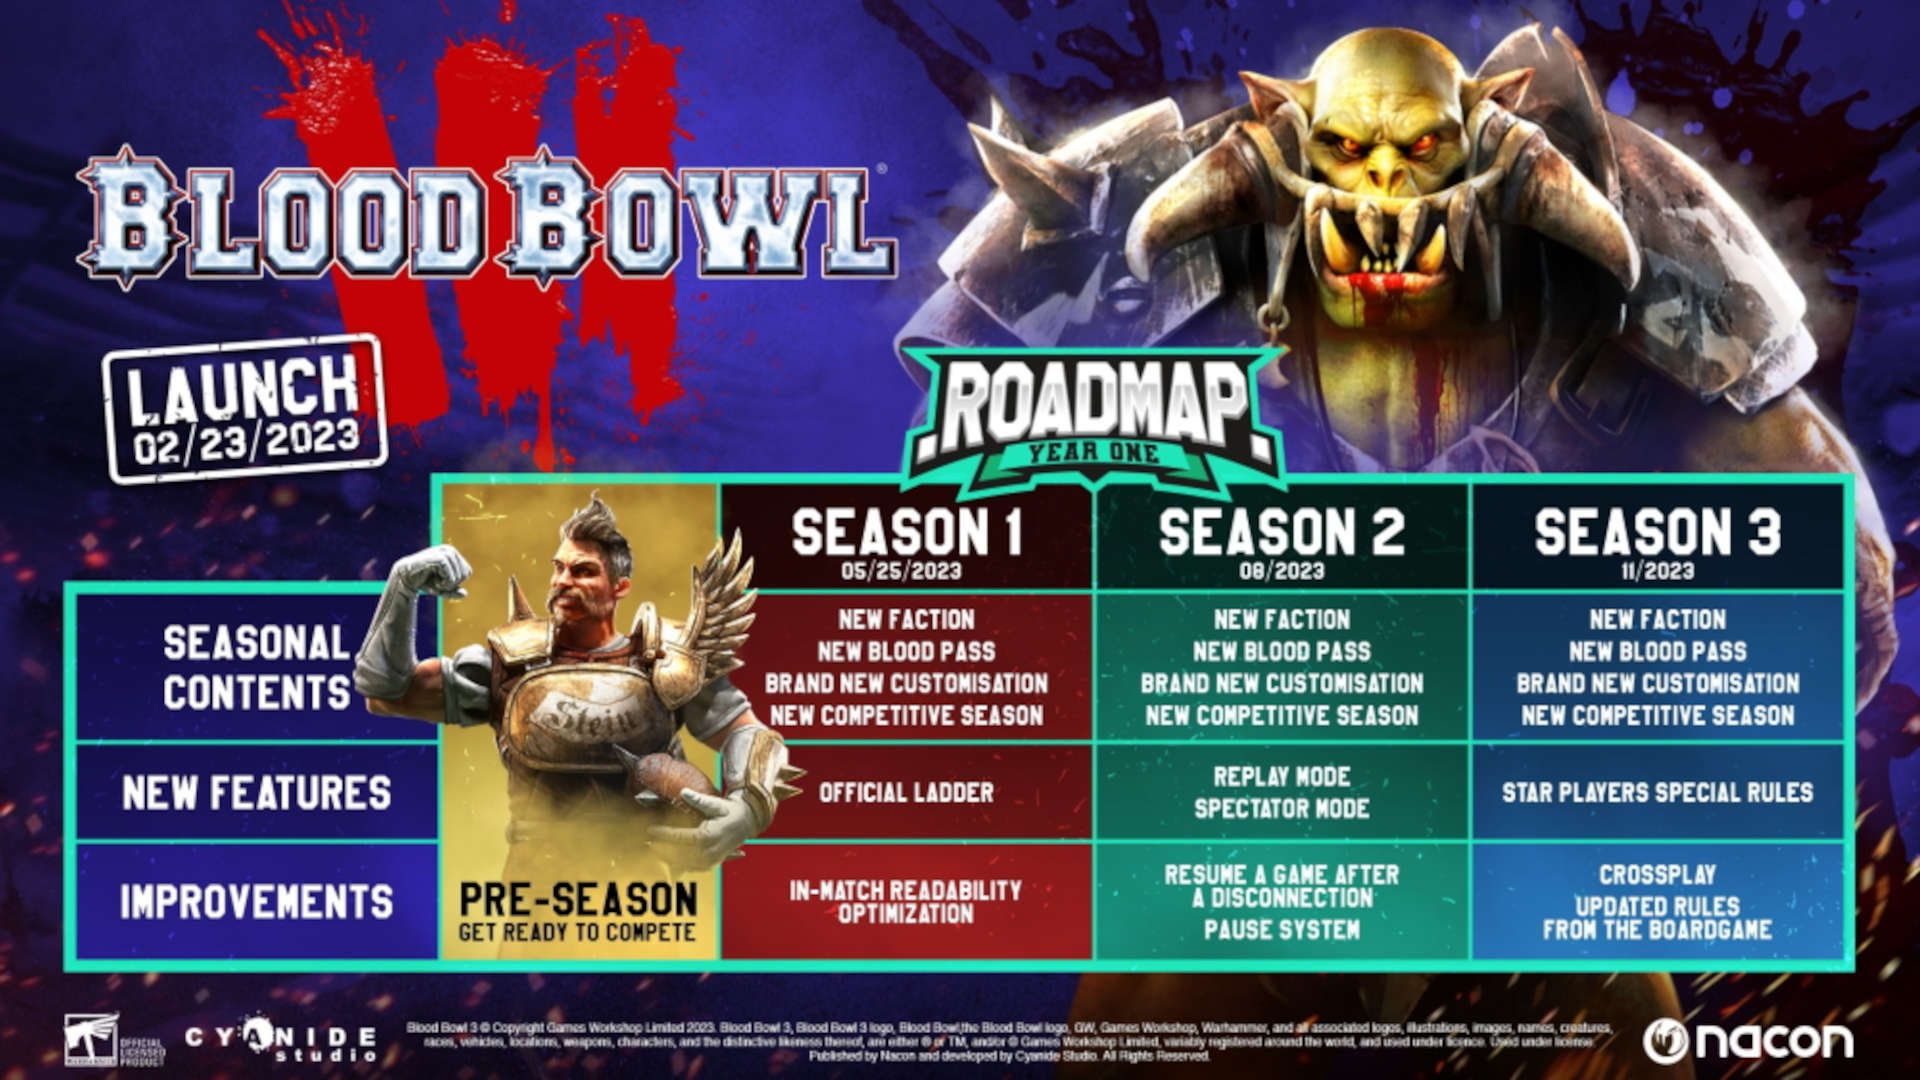 Blood Bowl 3 community letter - development roadmap for the game by Cyanide Studio